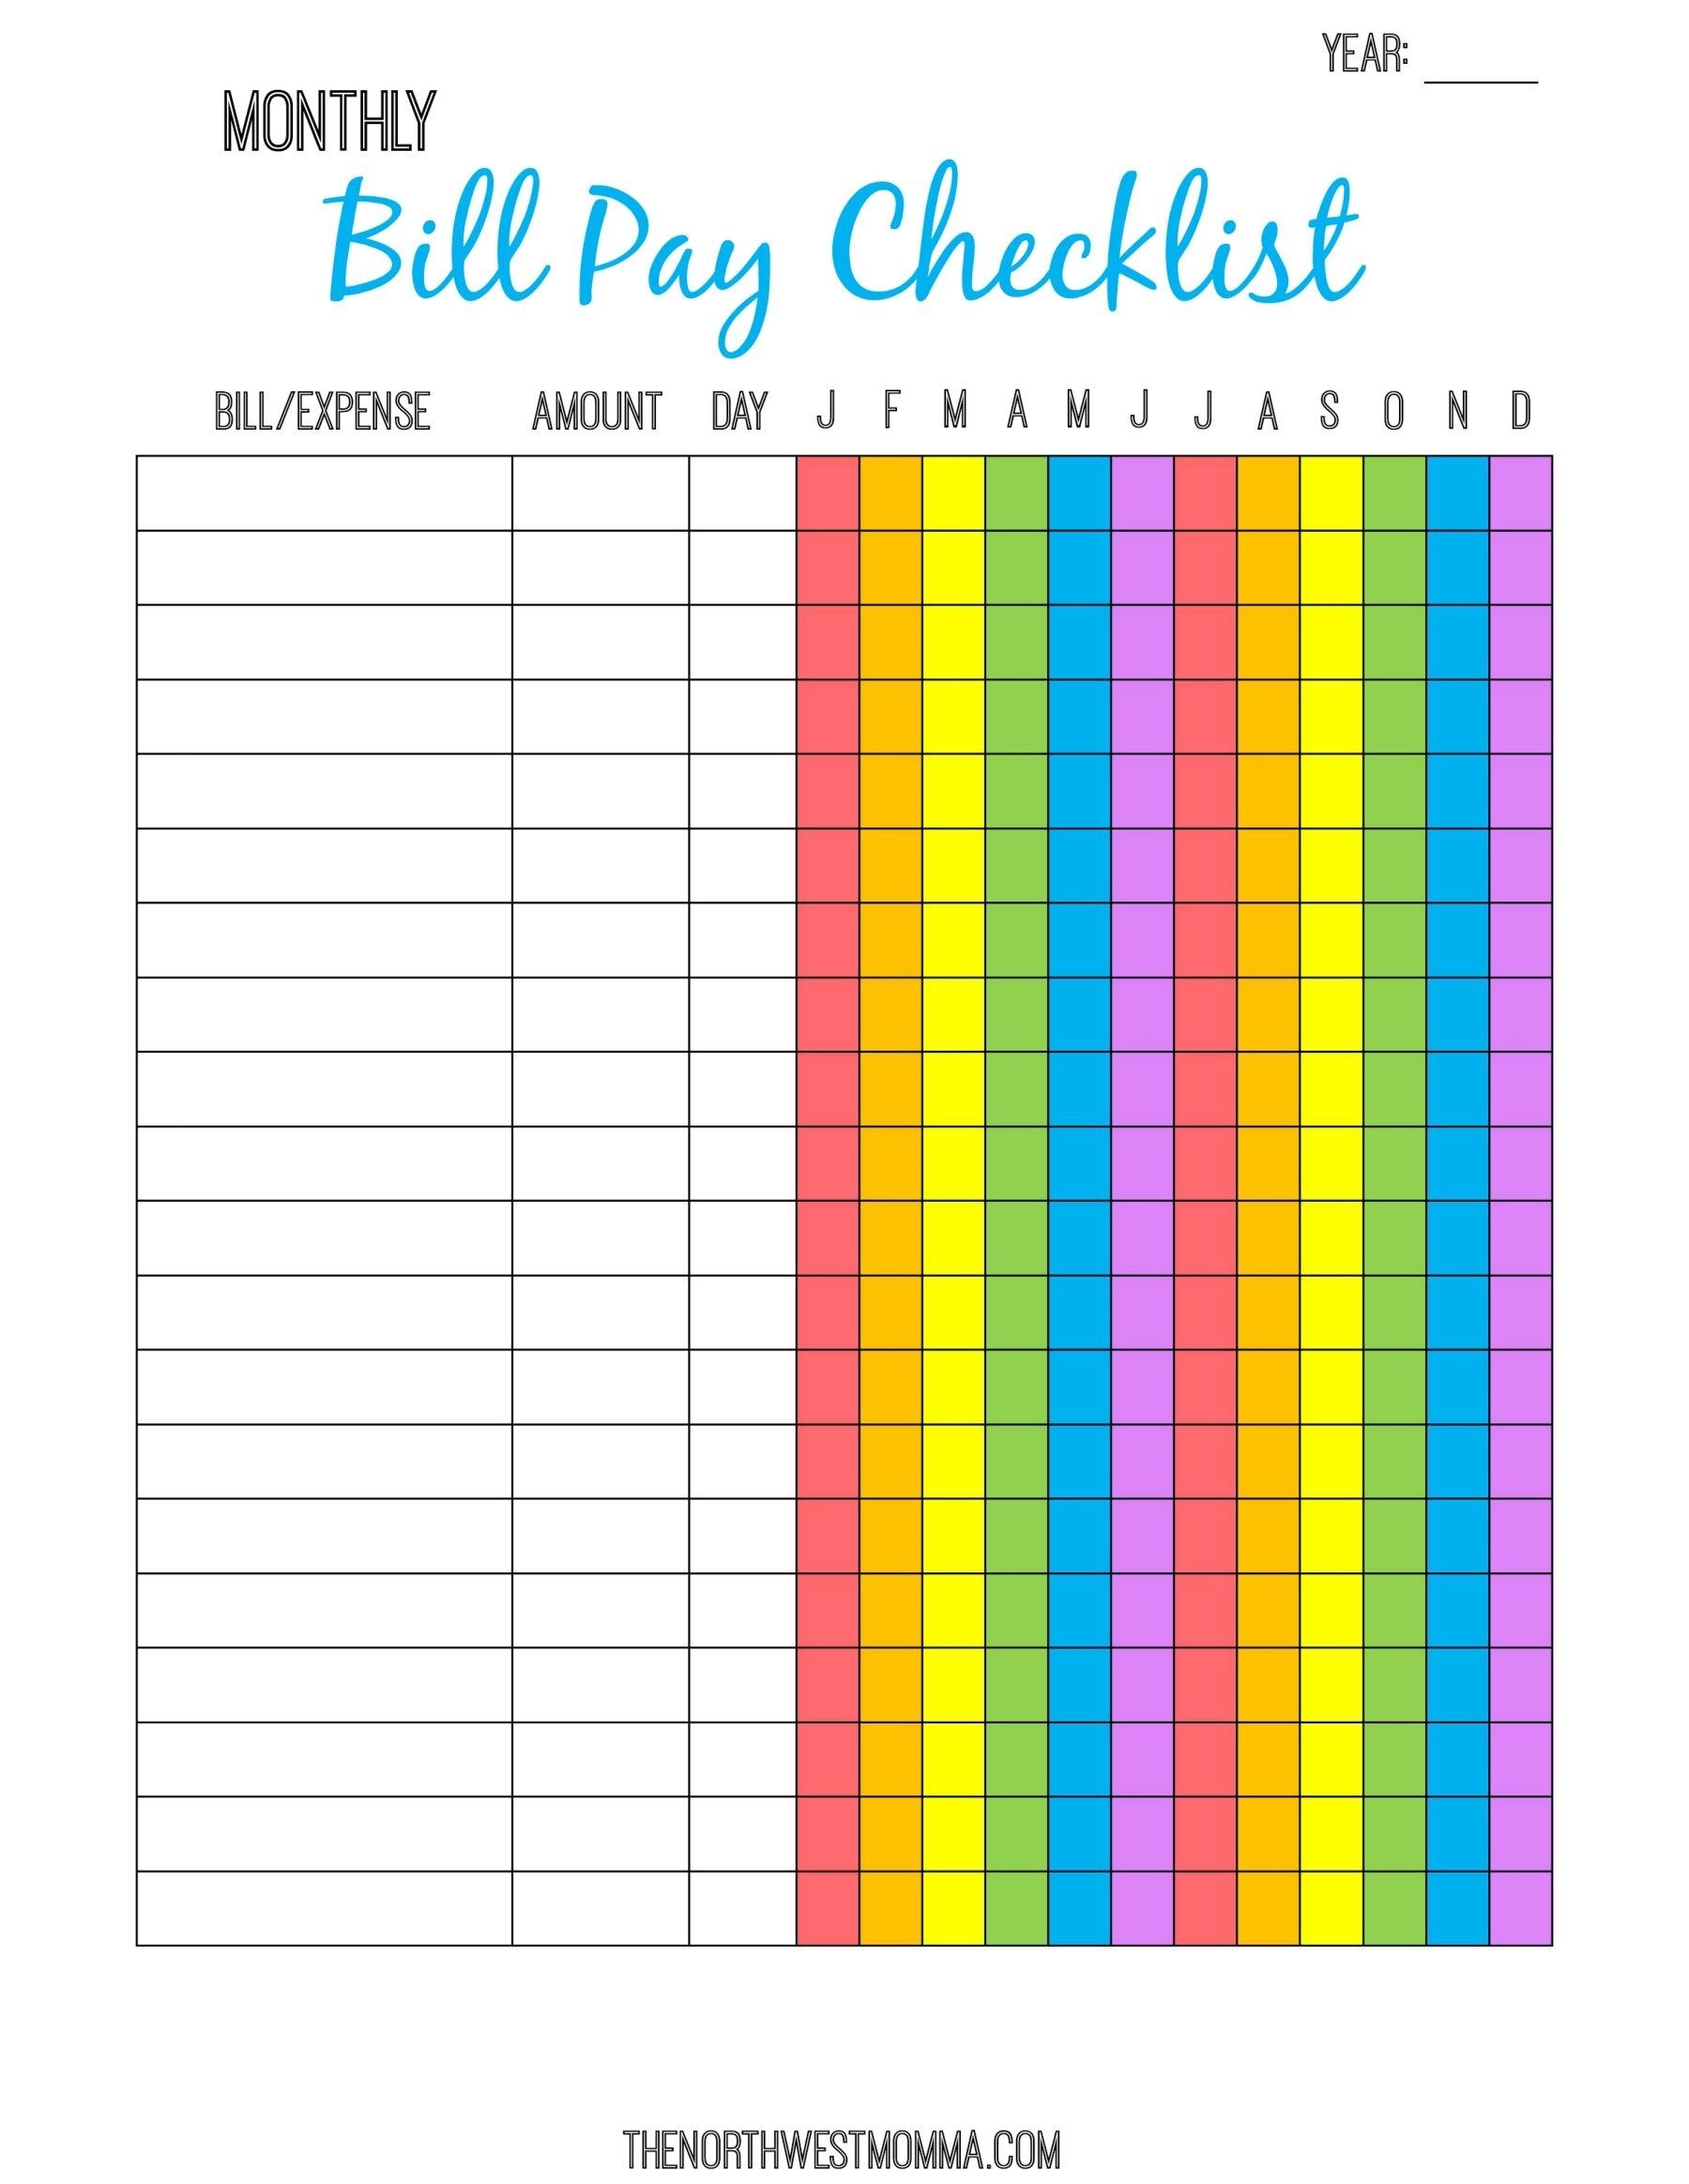 Monthly Bill Pay Checklist- Free Printable! | Organizing  Free Printable Bill Payment Sheet